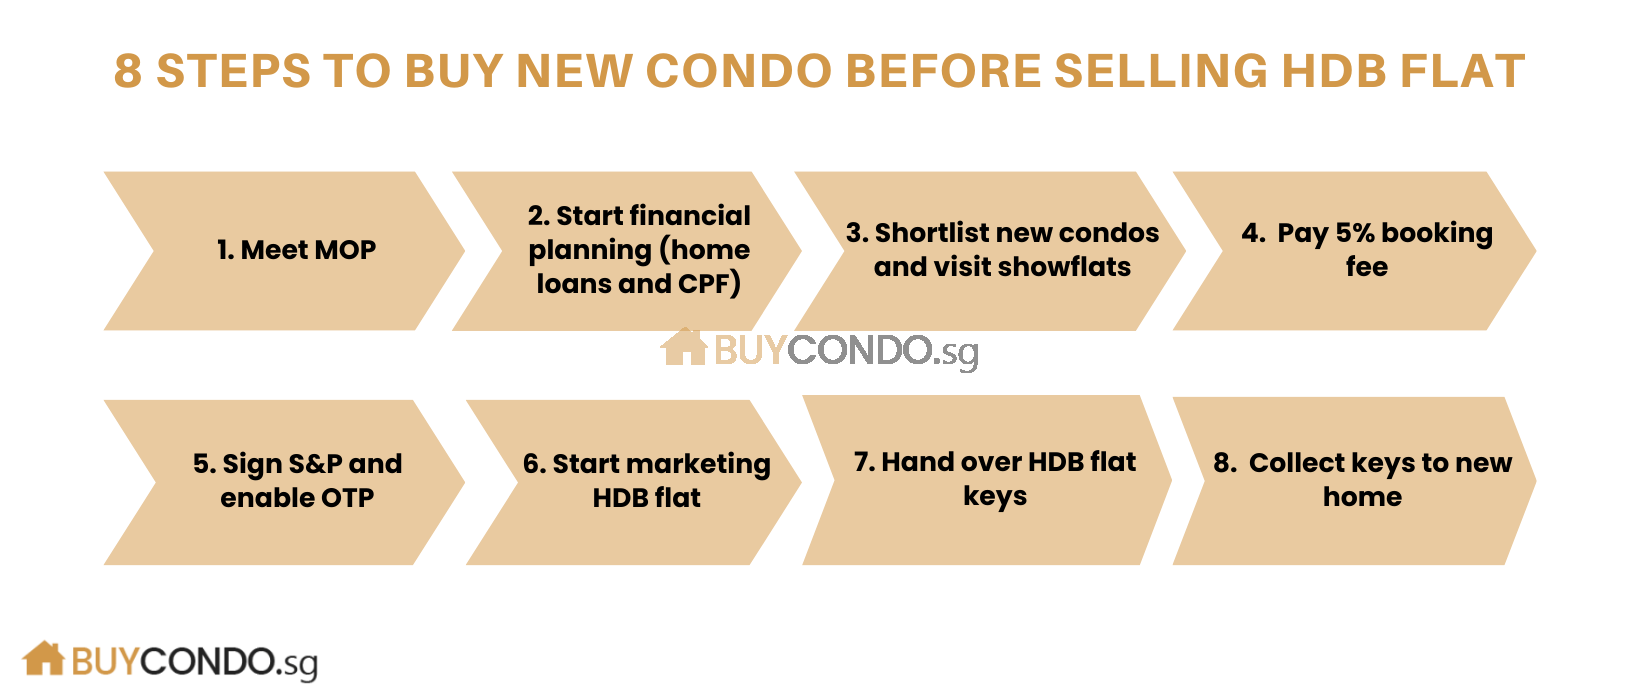 8 Simple Steps to Buy A New Launch Condo Before Selling Your HDB Flat